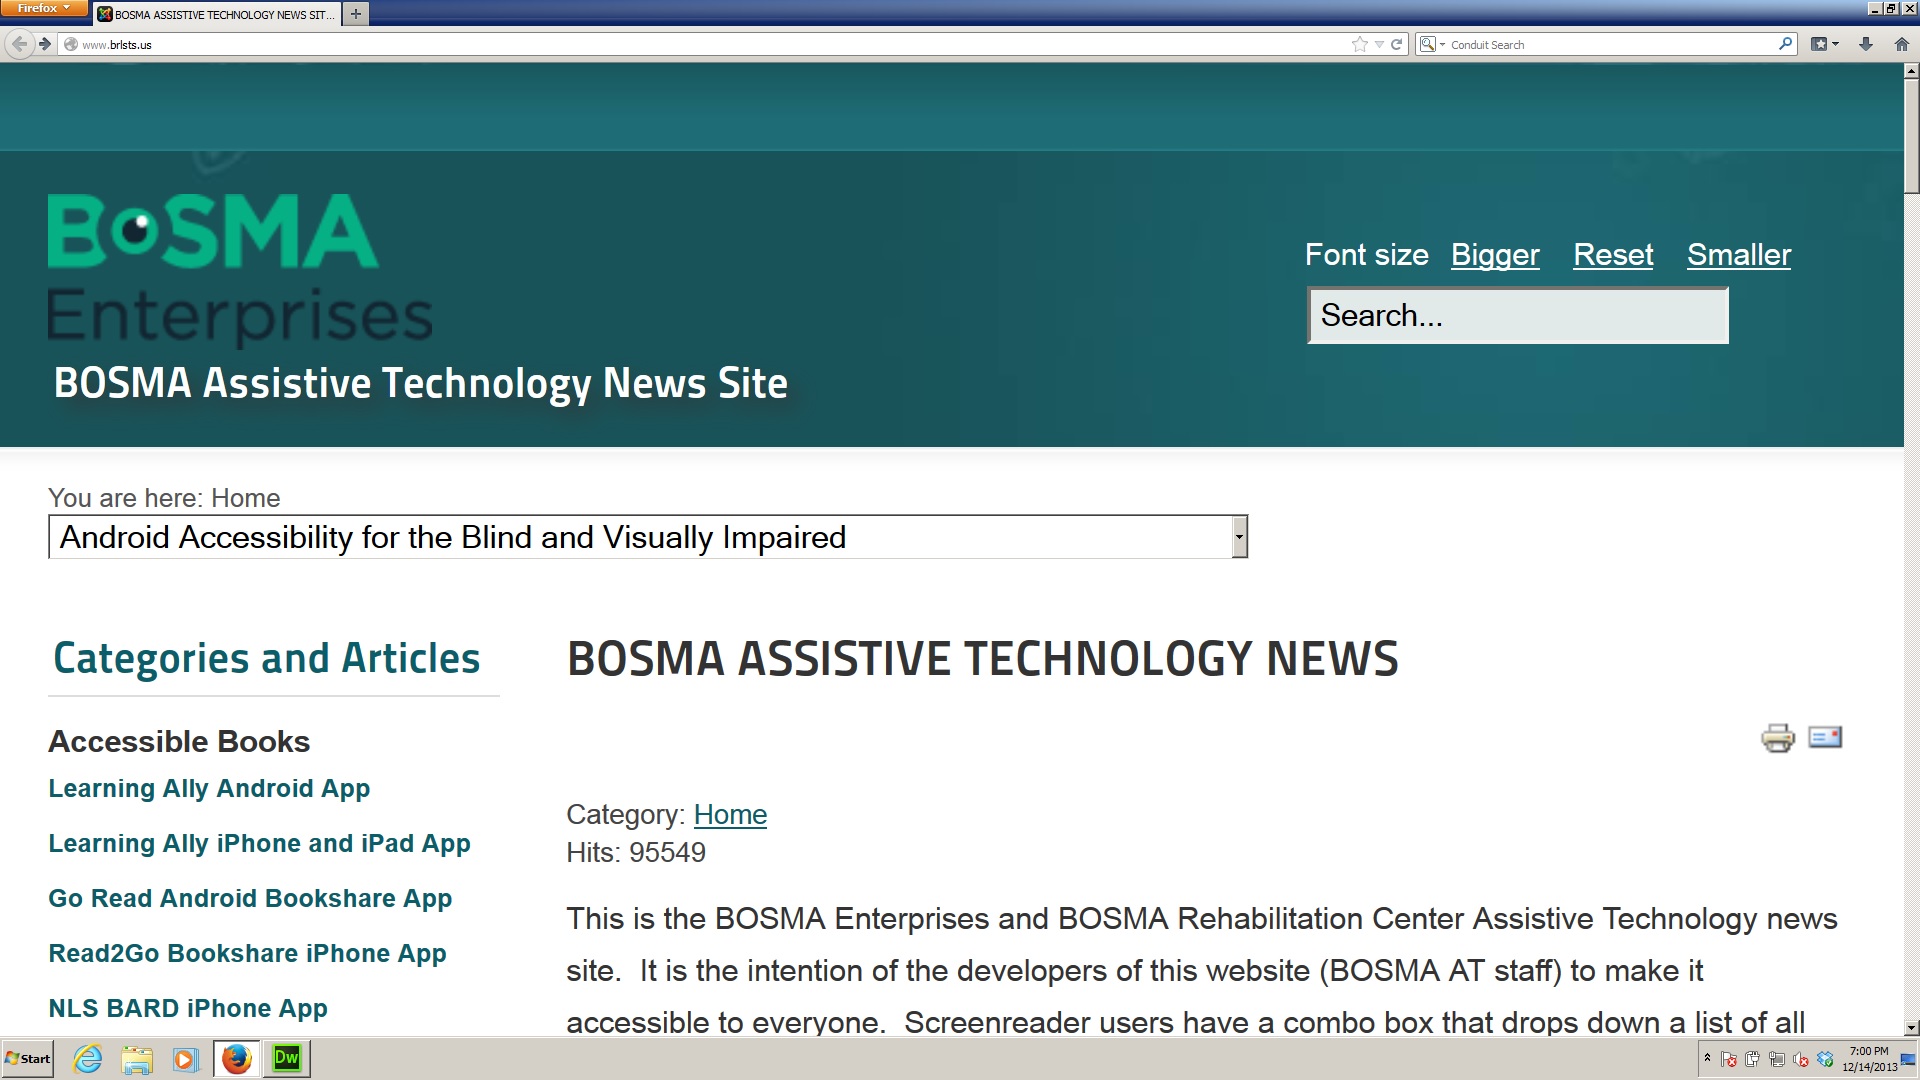 Bosma Assistive Technology News site at www.brlsts.us.